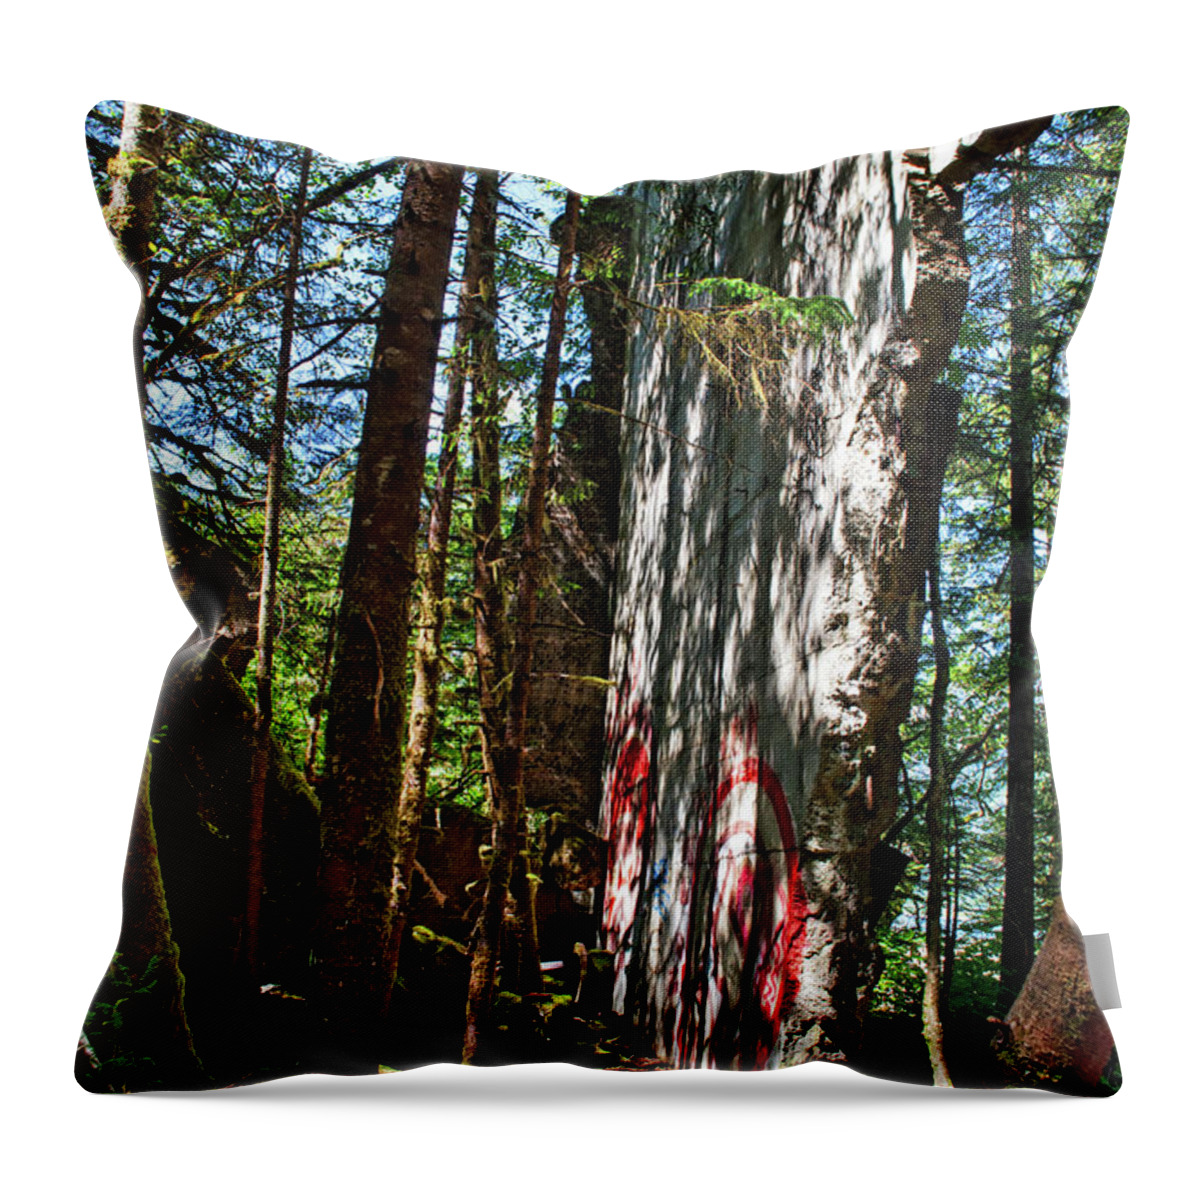 Abandoned Throw Pillow featuring the photograph Walls Come Crumbling Down by Cathy Mahnke